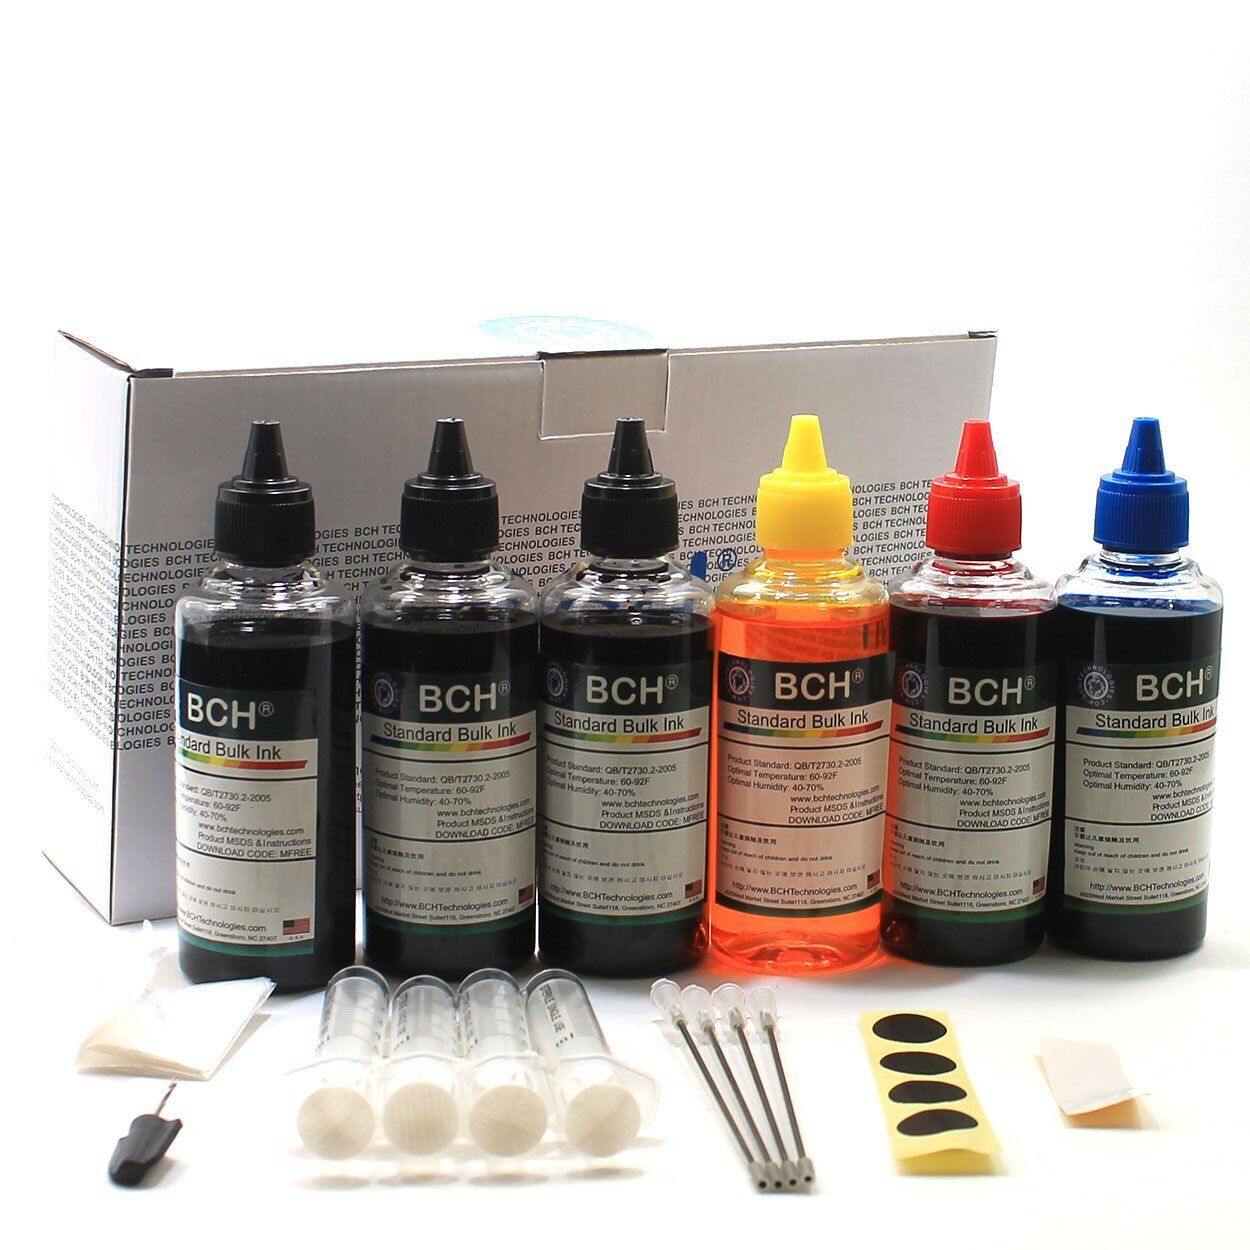 BCH Refill Ink for Inkjet Printer Cartridges Bulk 4-Color Kit with Color and Tri